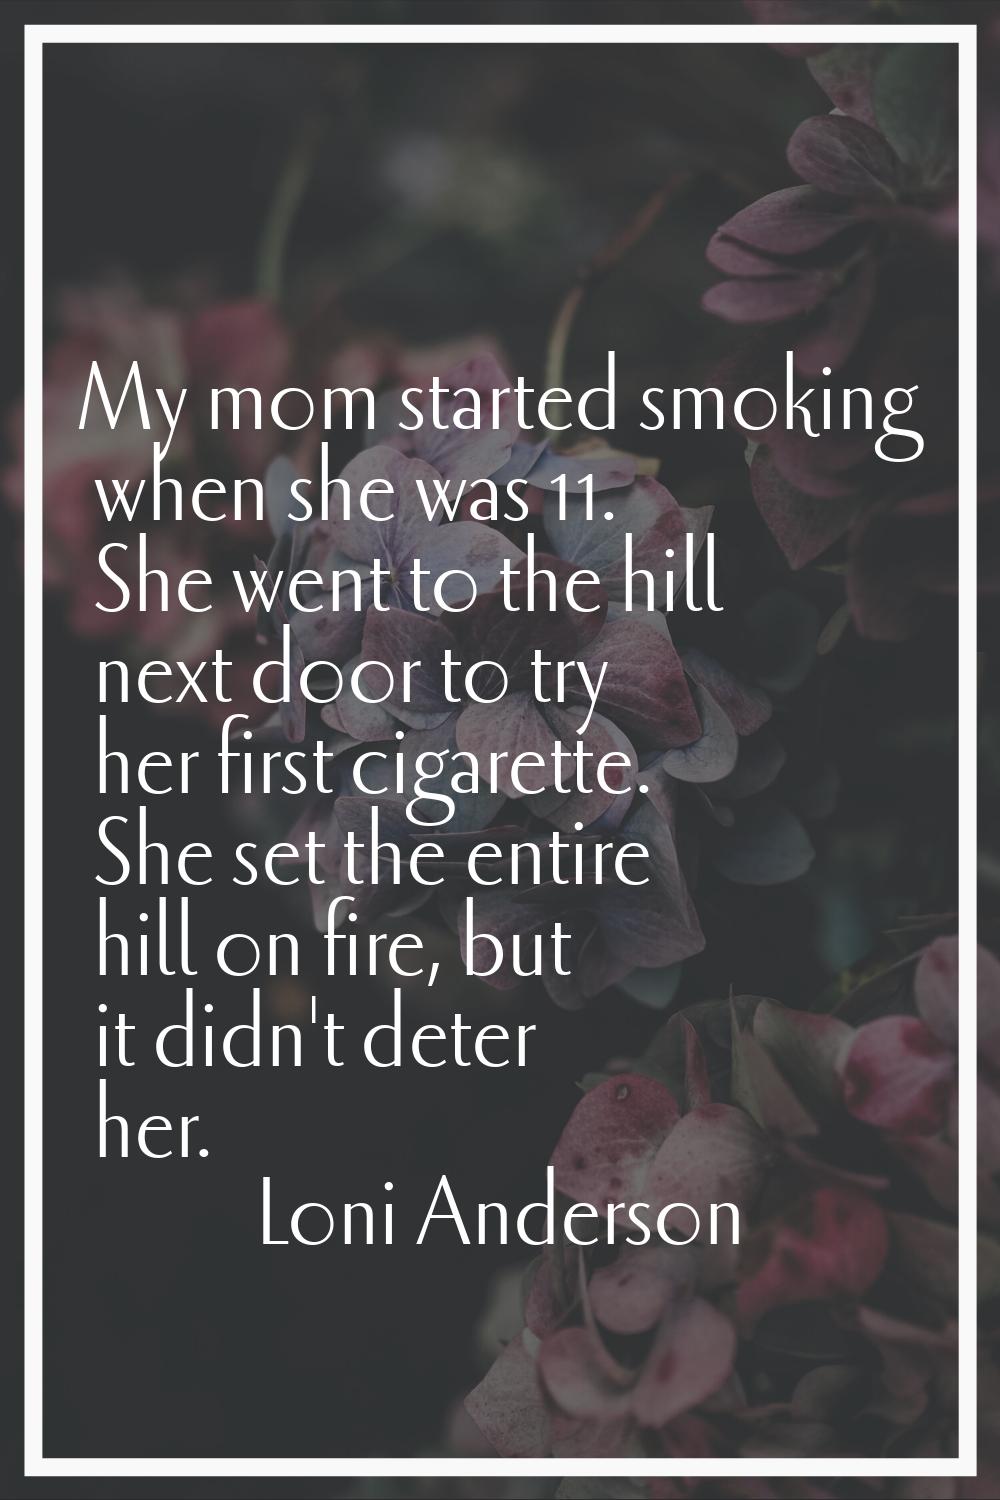 My mom started smoking when she was 11. She went to the hill next door to try her first cigarette. 